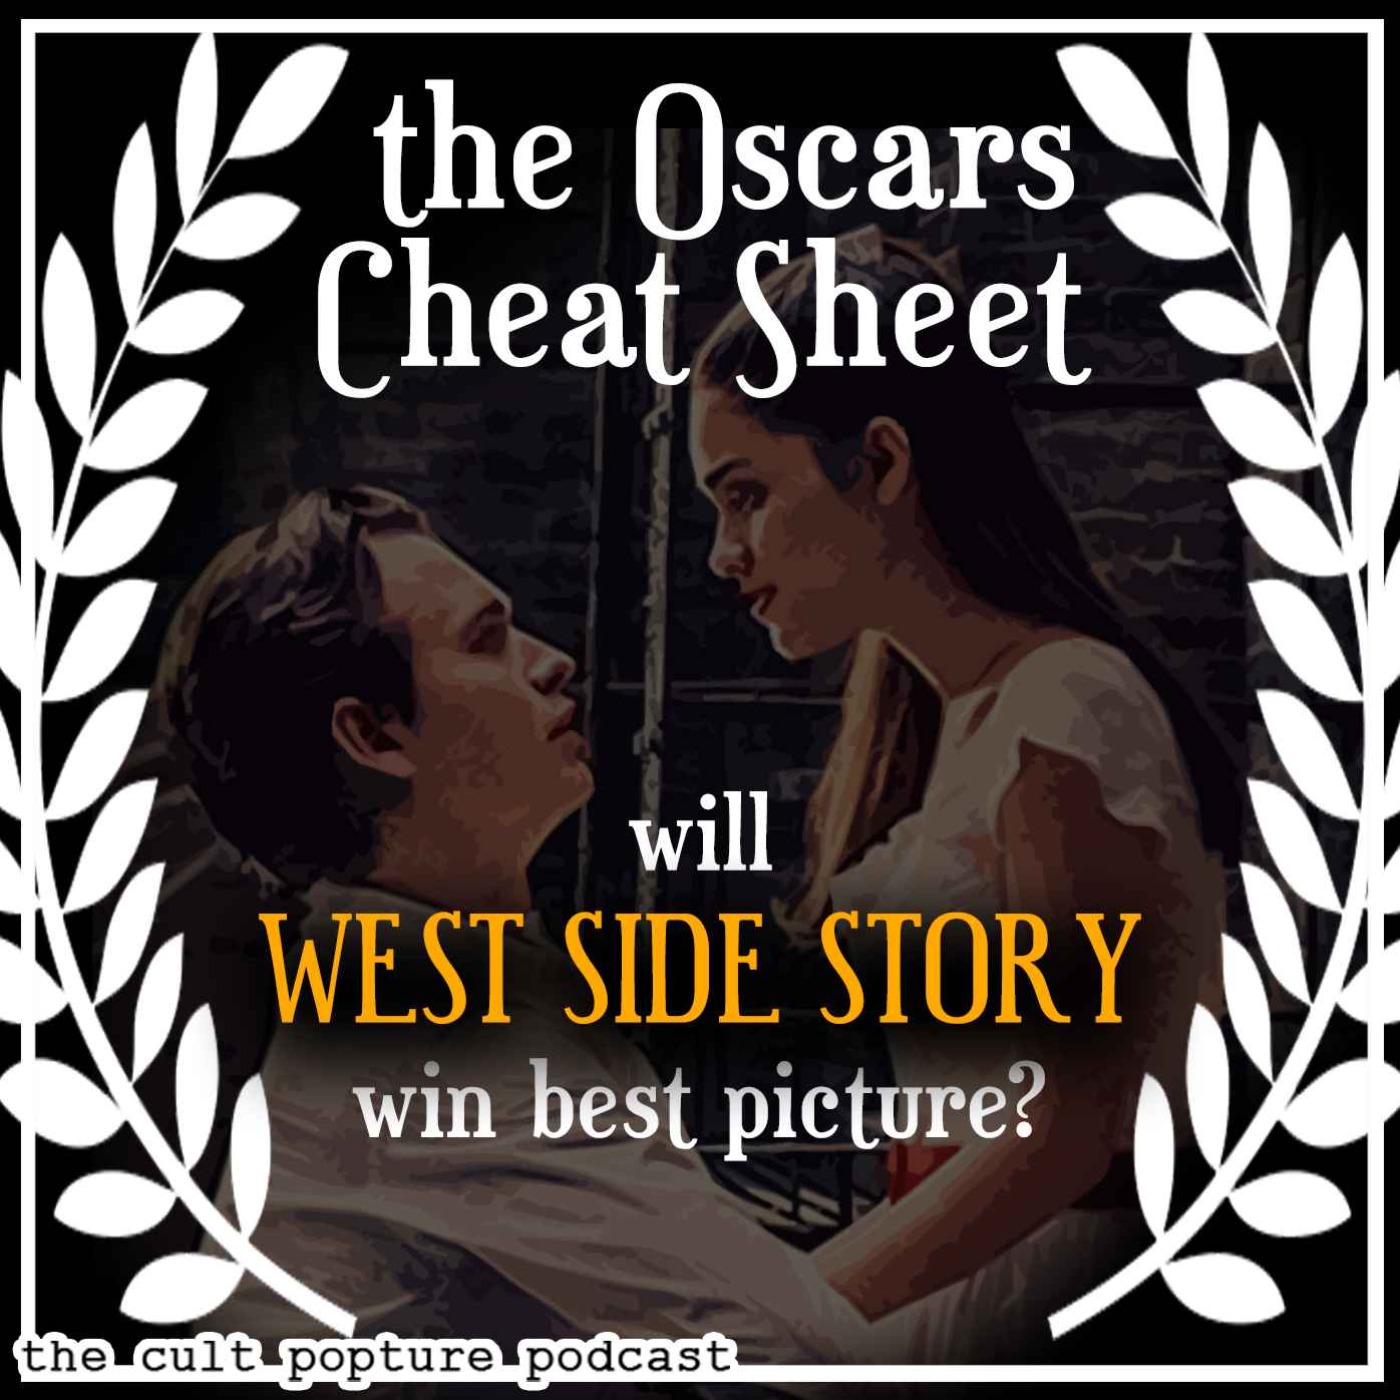 Will WEST SIDE STORY Win Best Picture? | The Oscars Cheat Sheet